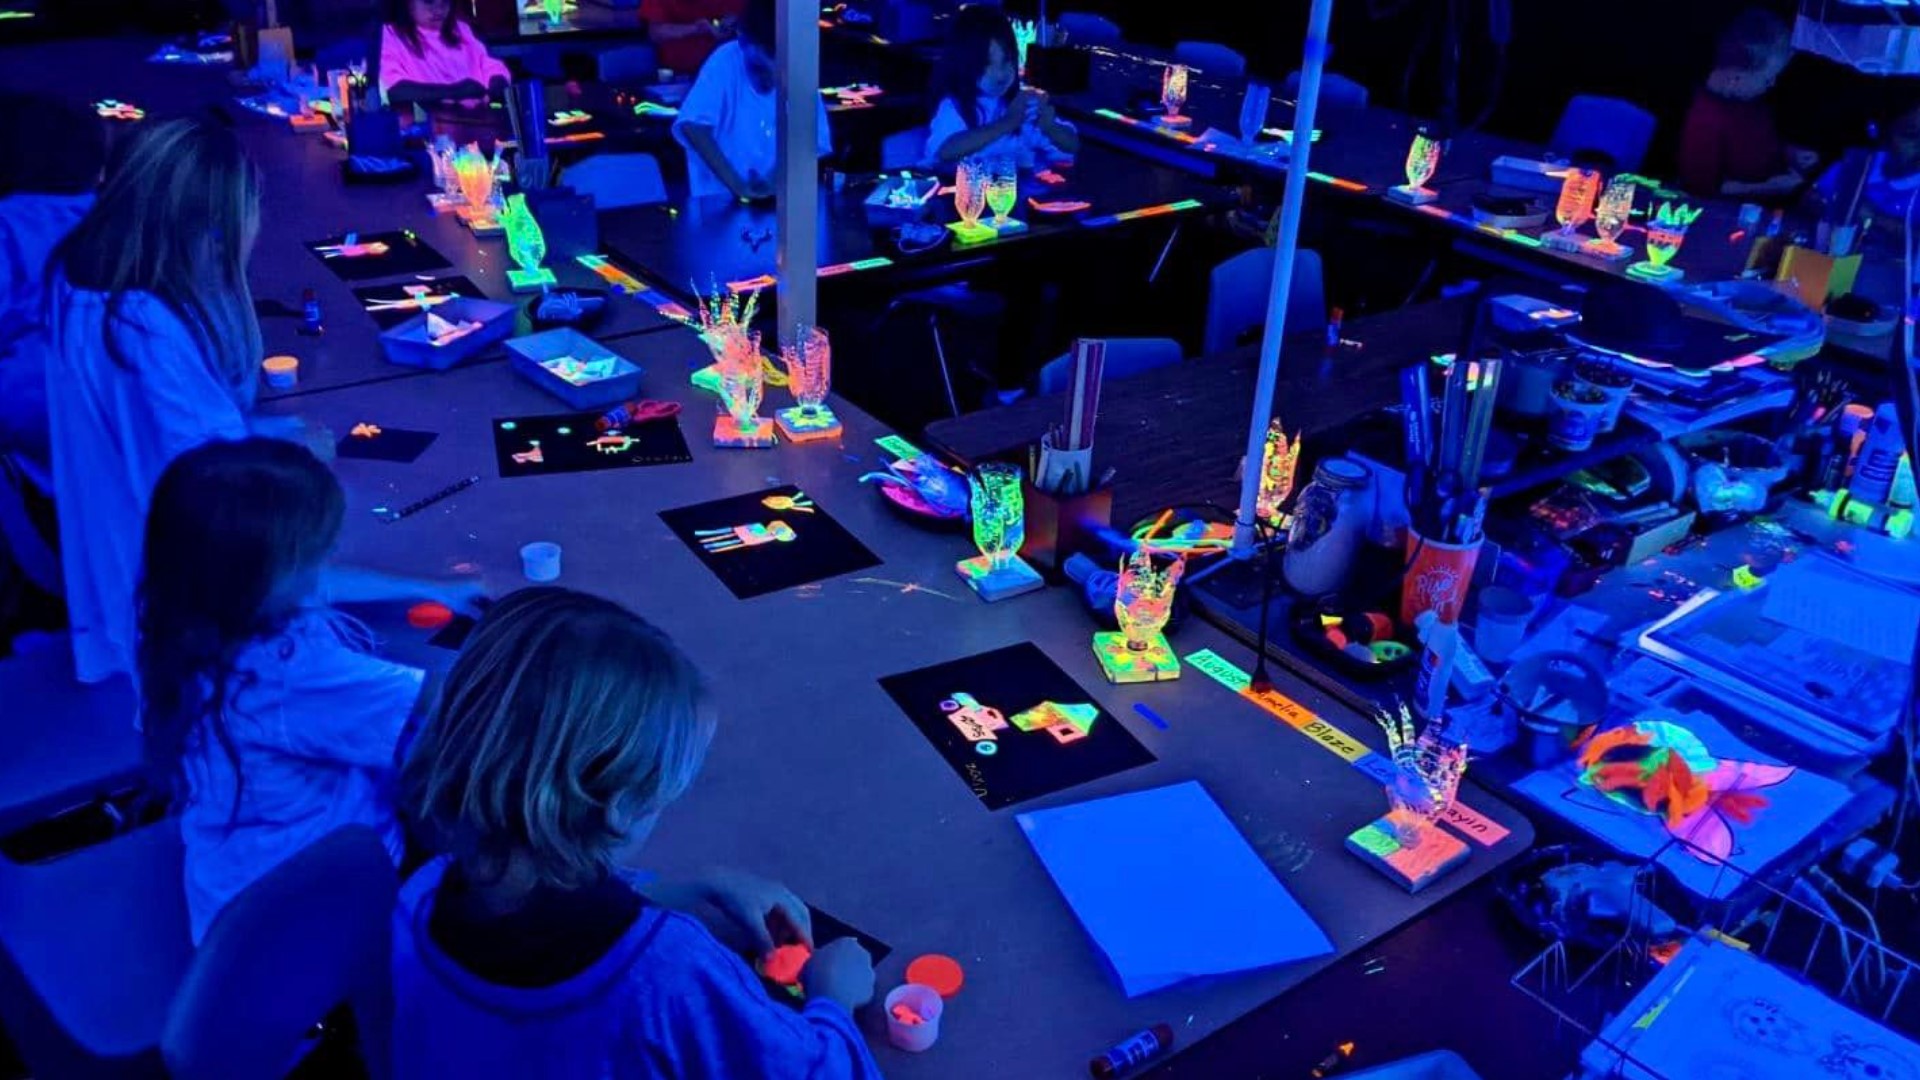 Students at First Lutheran school in Fort Smith spent several weeks designing a black light art display